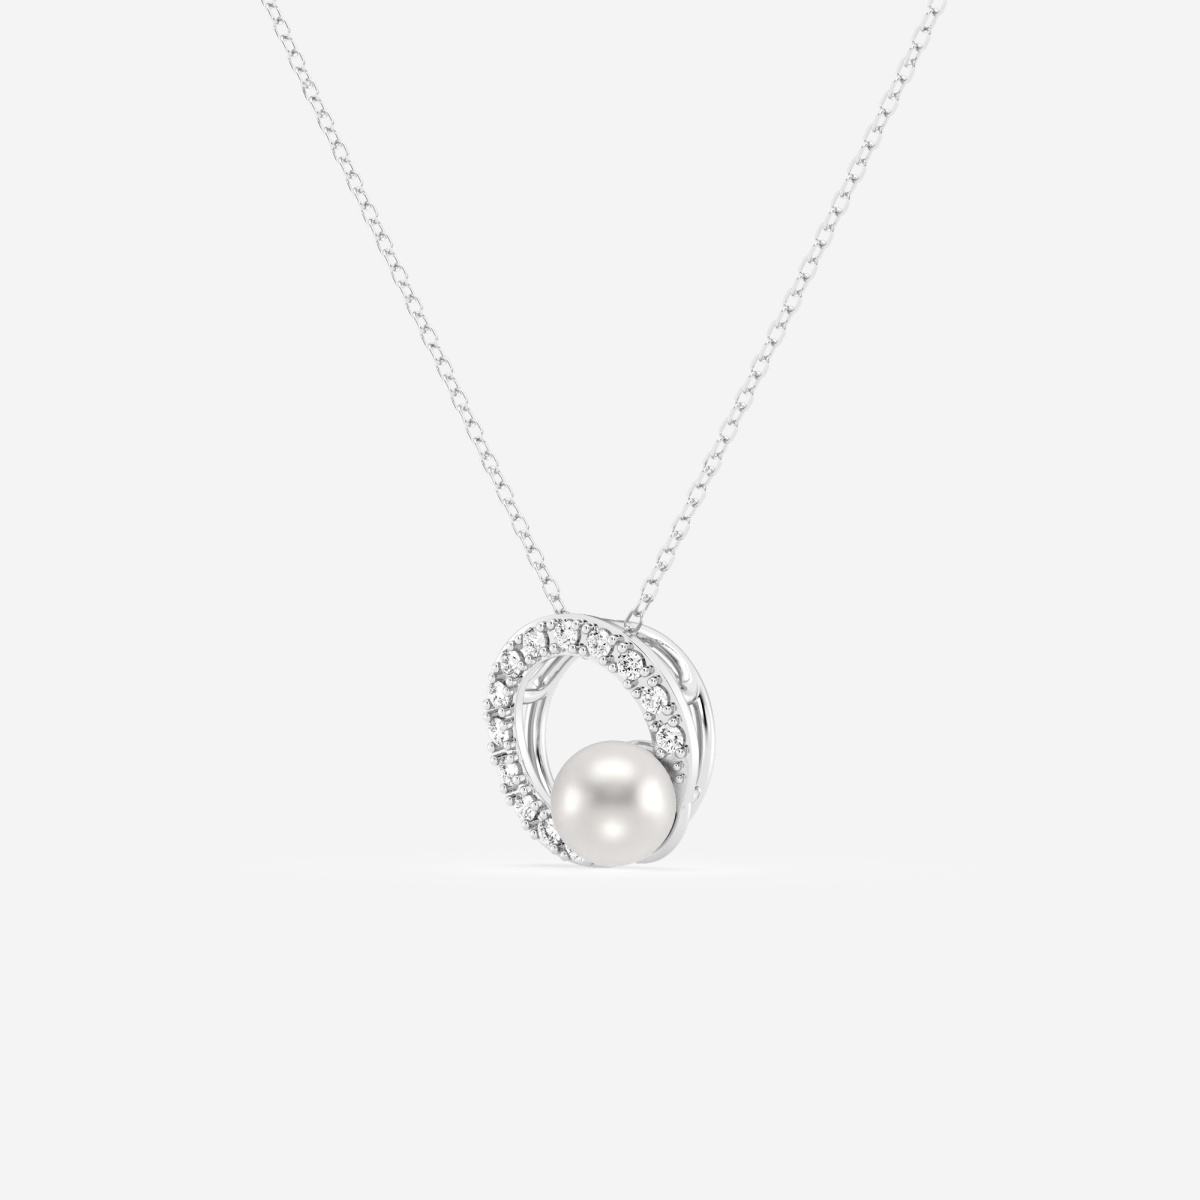 Additional Image 1 for  4.5 - 5.0 mm Cultured Freshwater Pearl and 1/10 ctw Lab Grown Diamond Circle Fashion Pendant